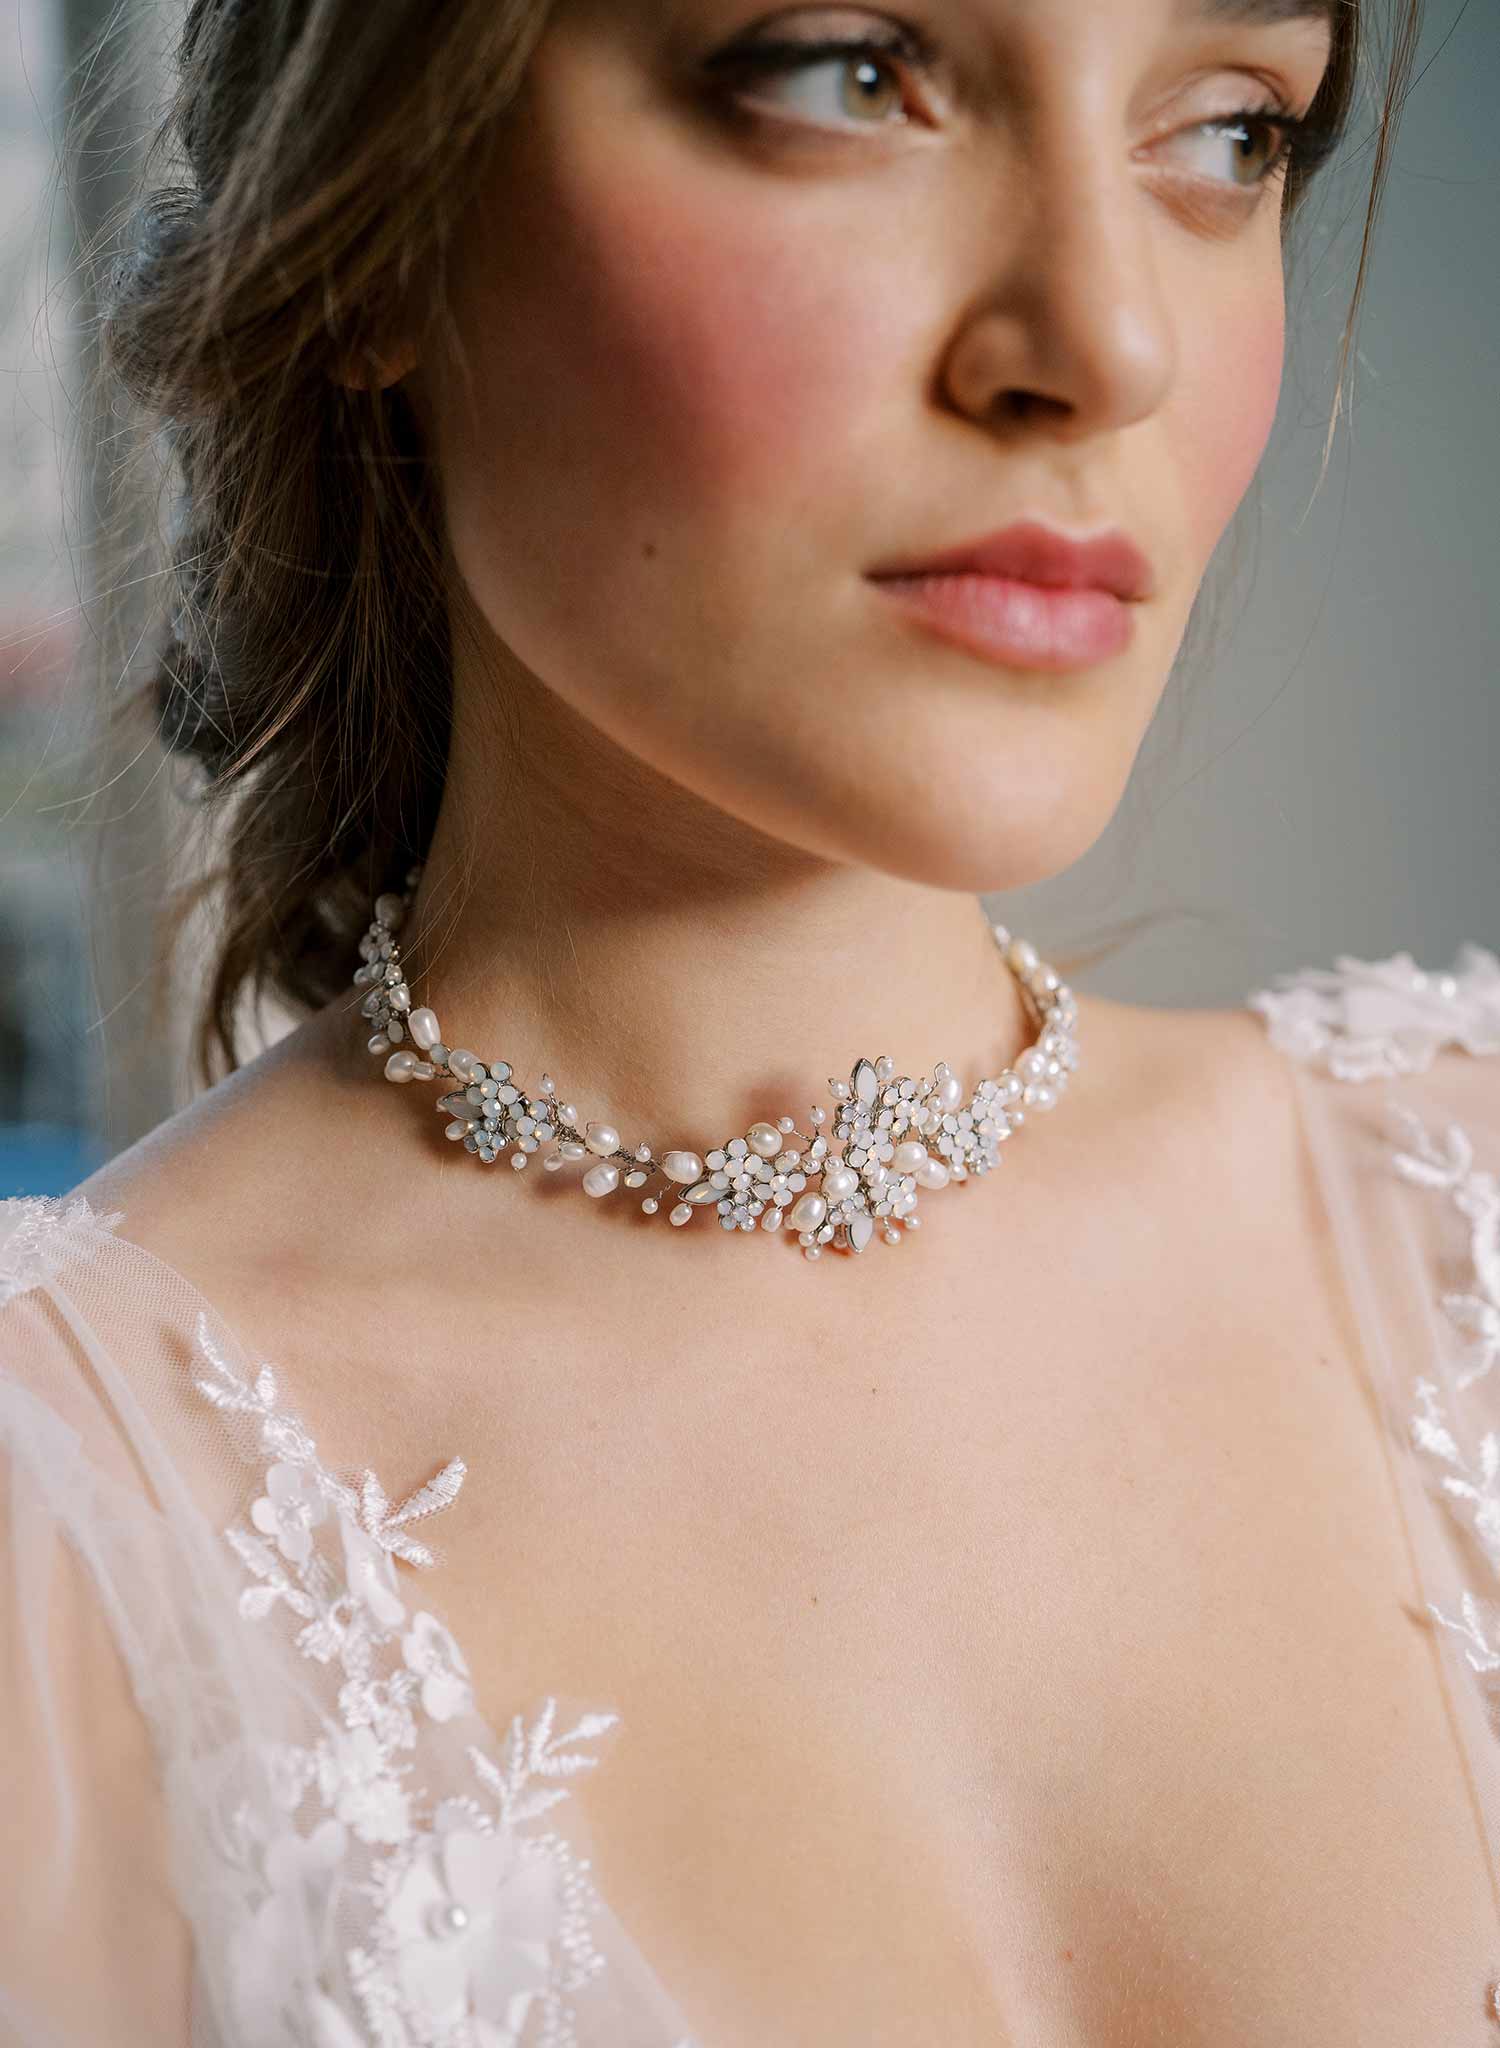 Clustered pearl and opal bridal choker necklace - Style #2481